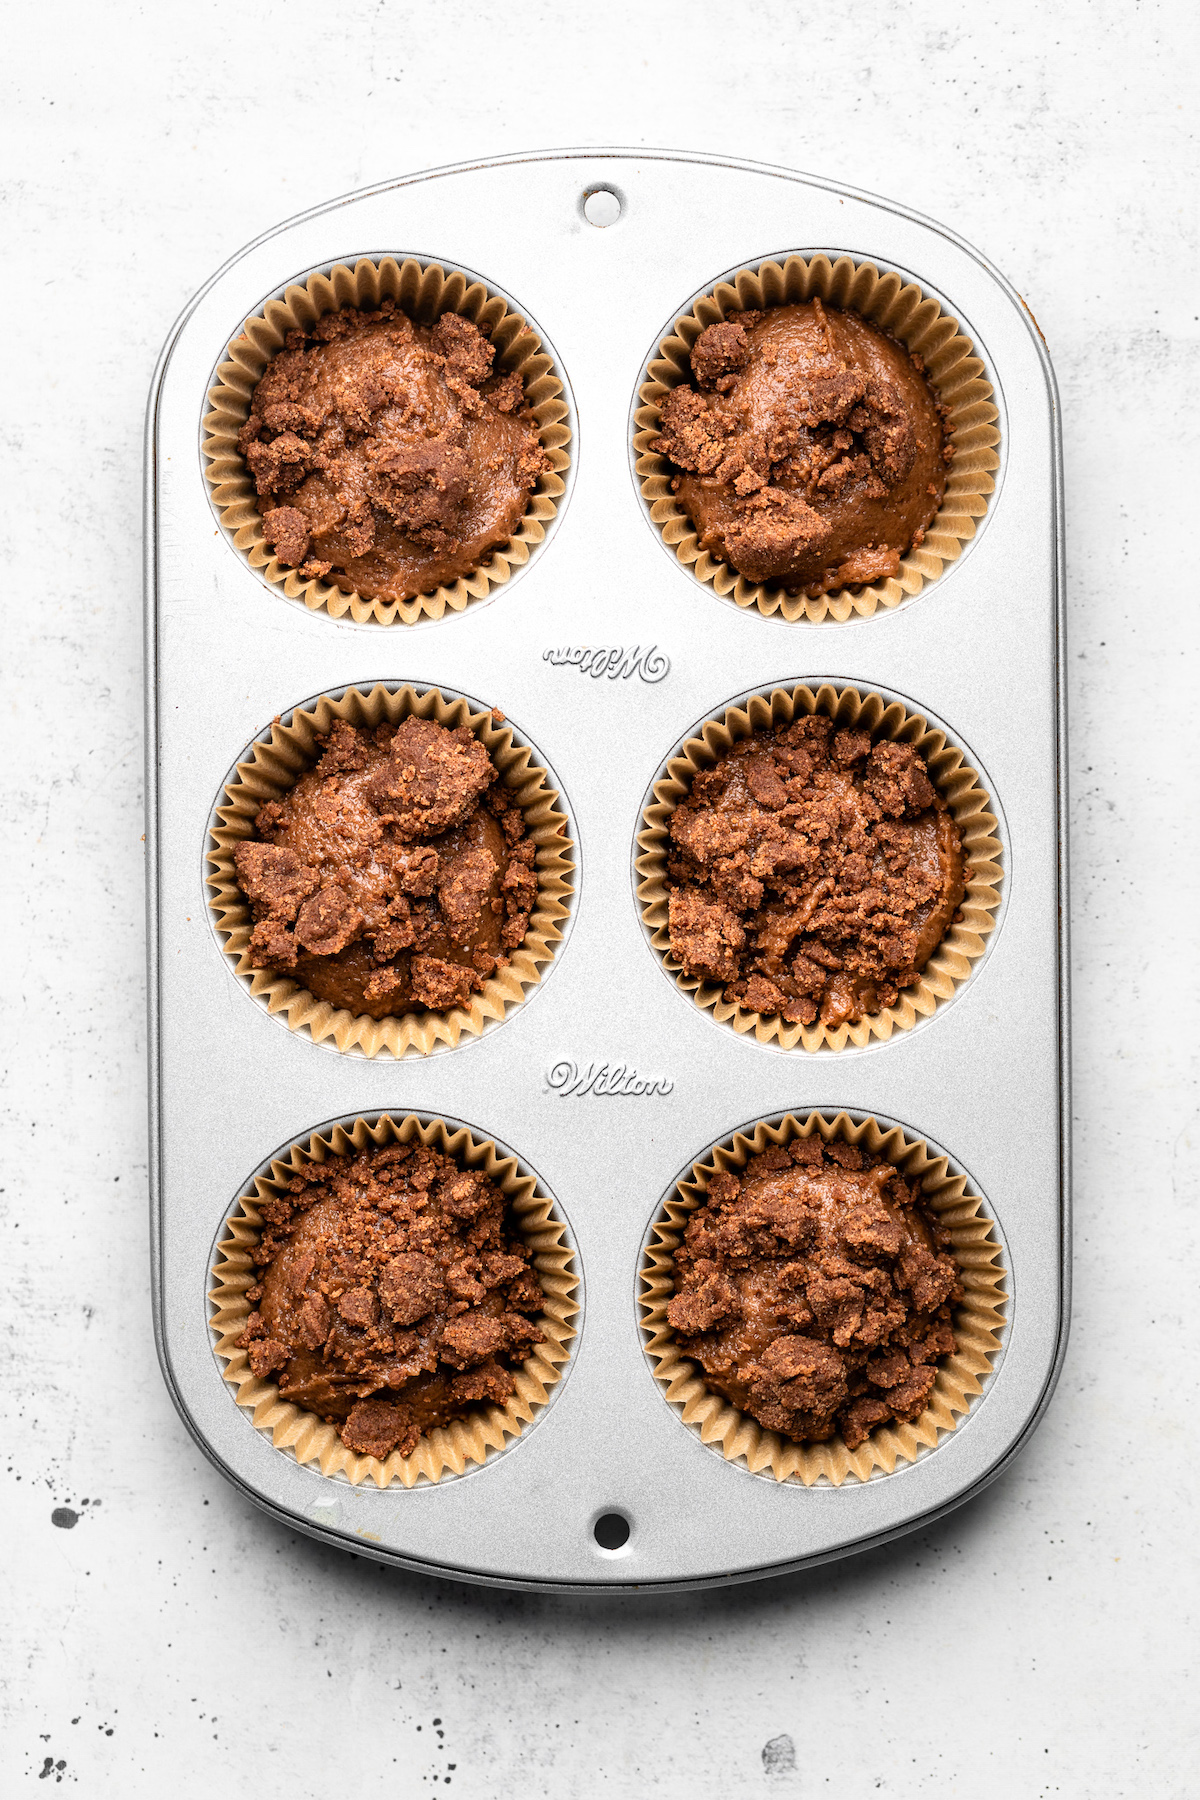 Muffin batter and crumble topping in a silver muffin tin before baking.